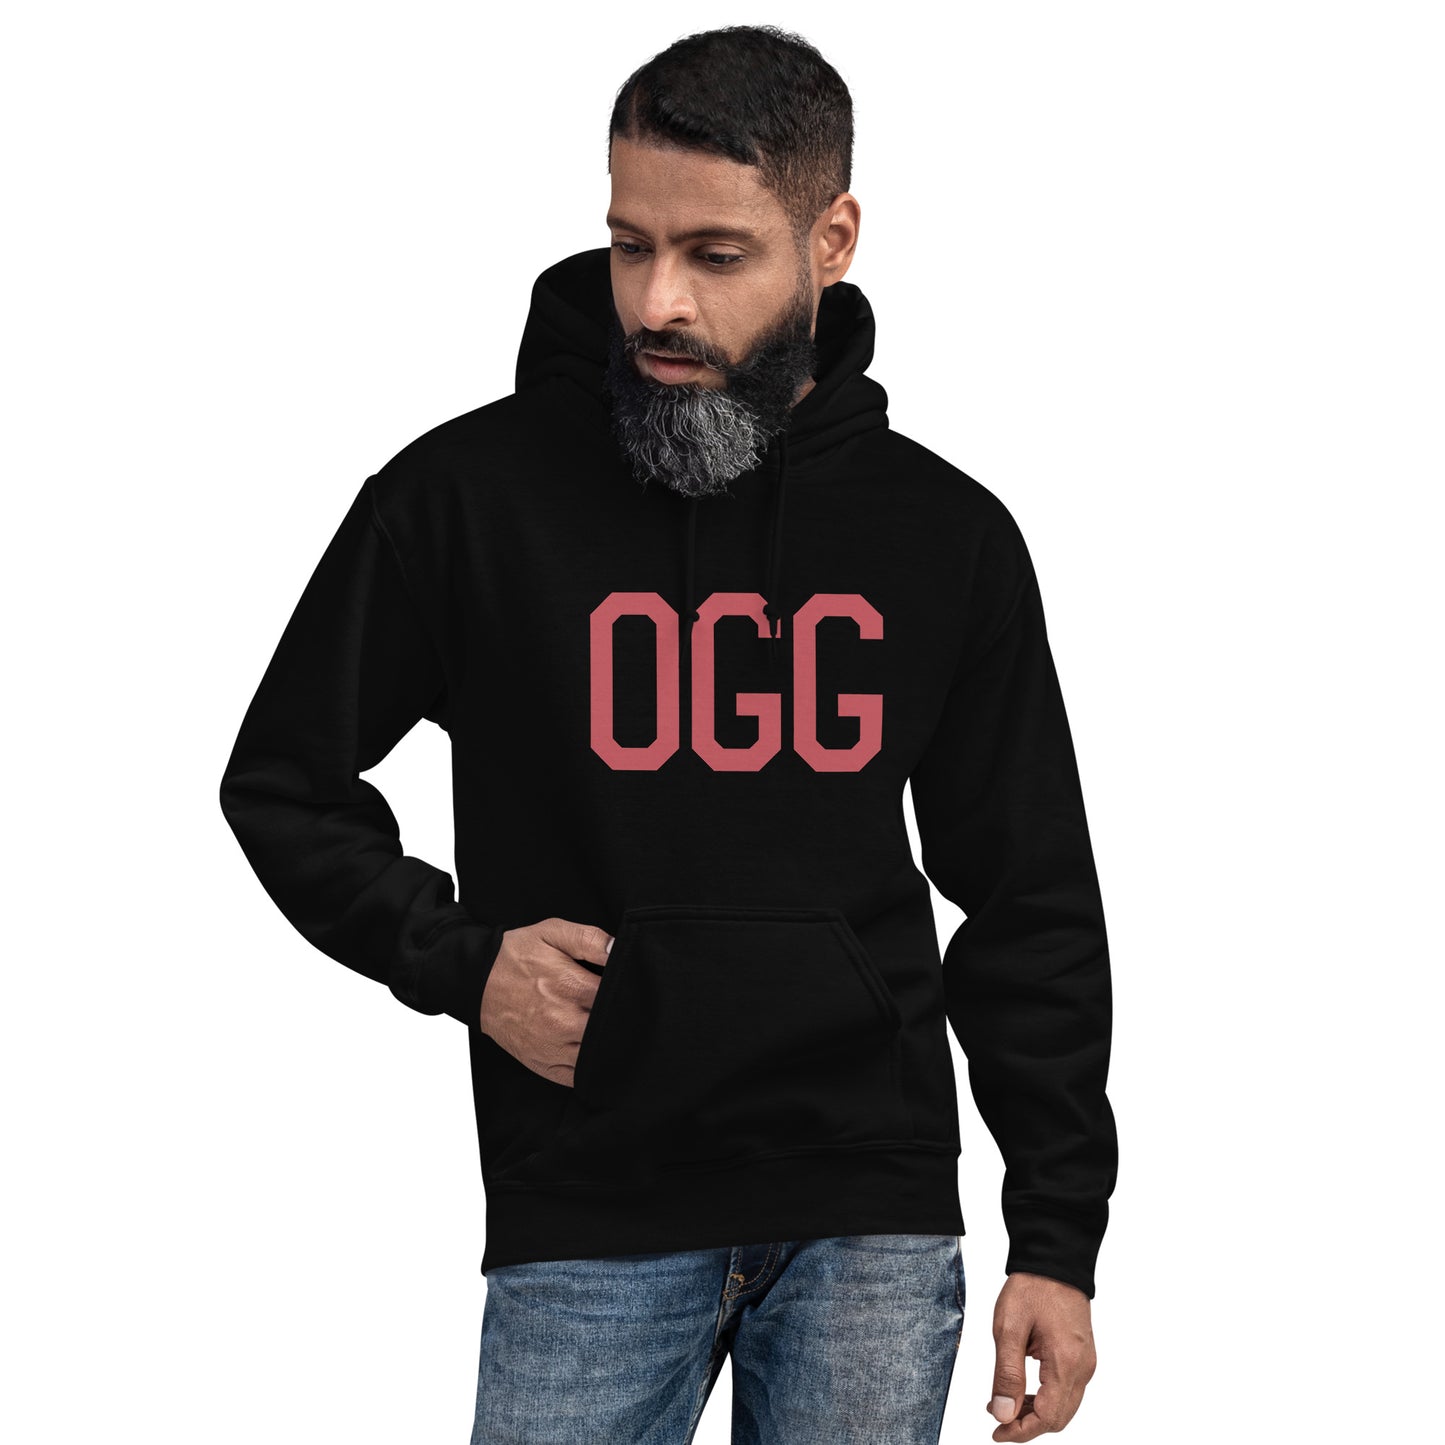 Aviation Enthusiast Hoodie - Deep Pink Graphic • OGG Maui • YHM Designs - Image 05